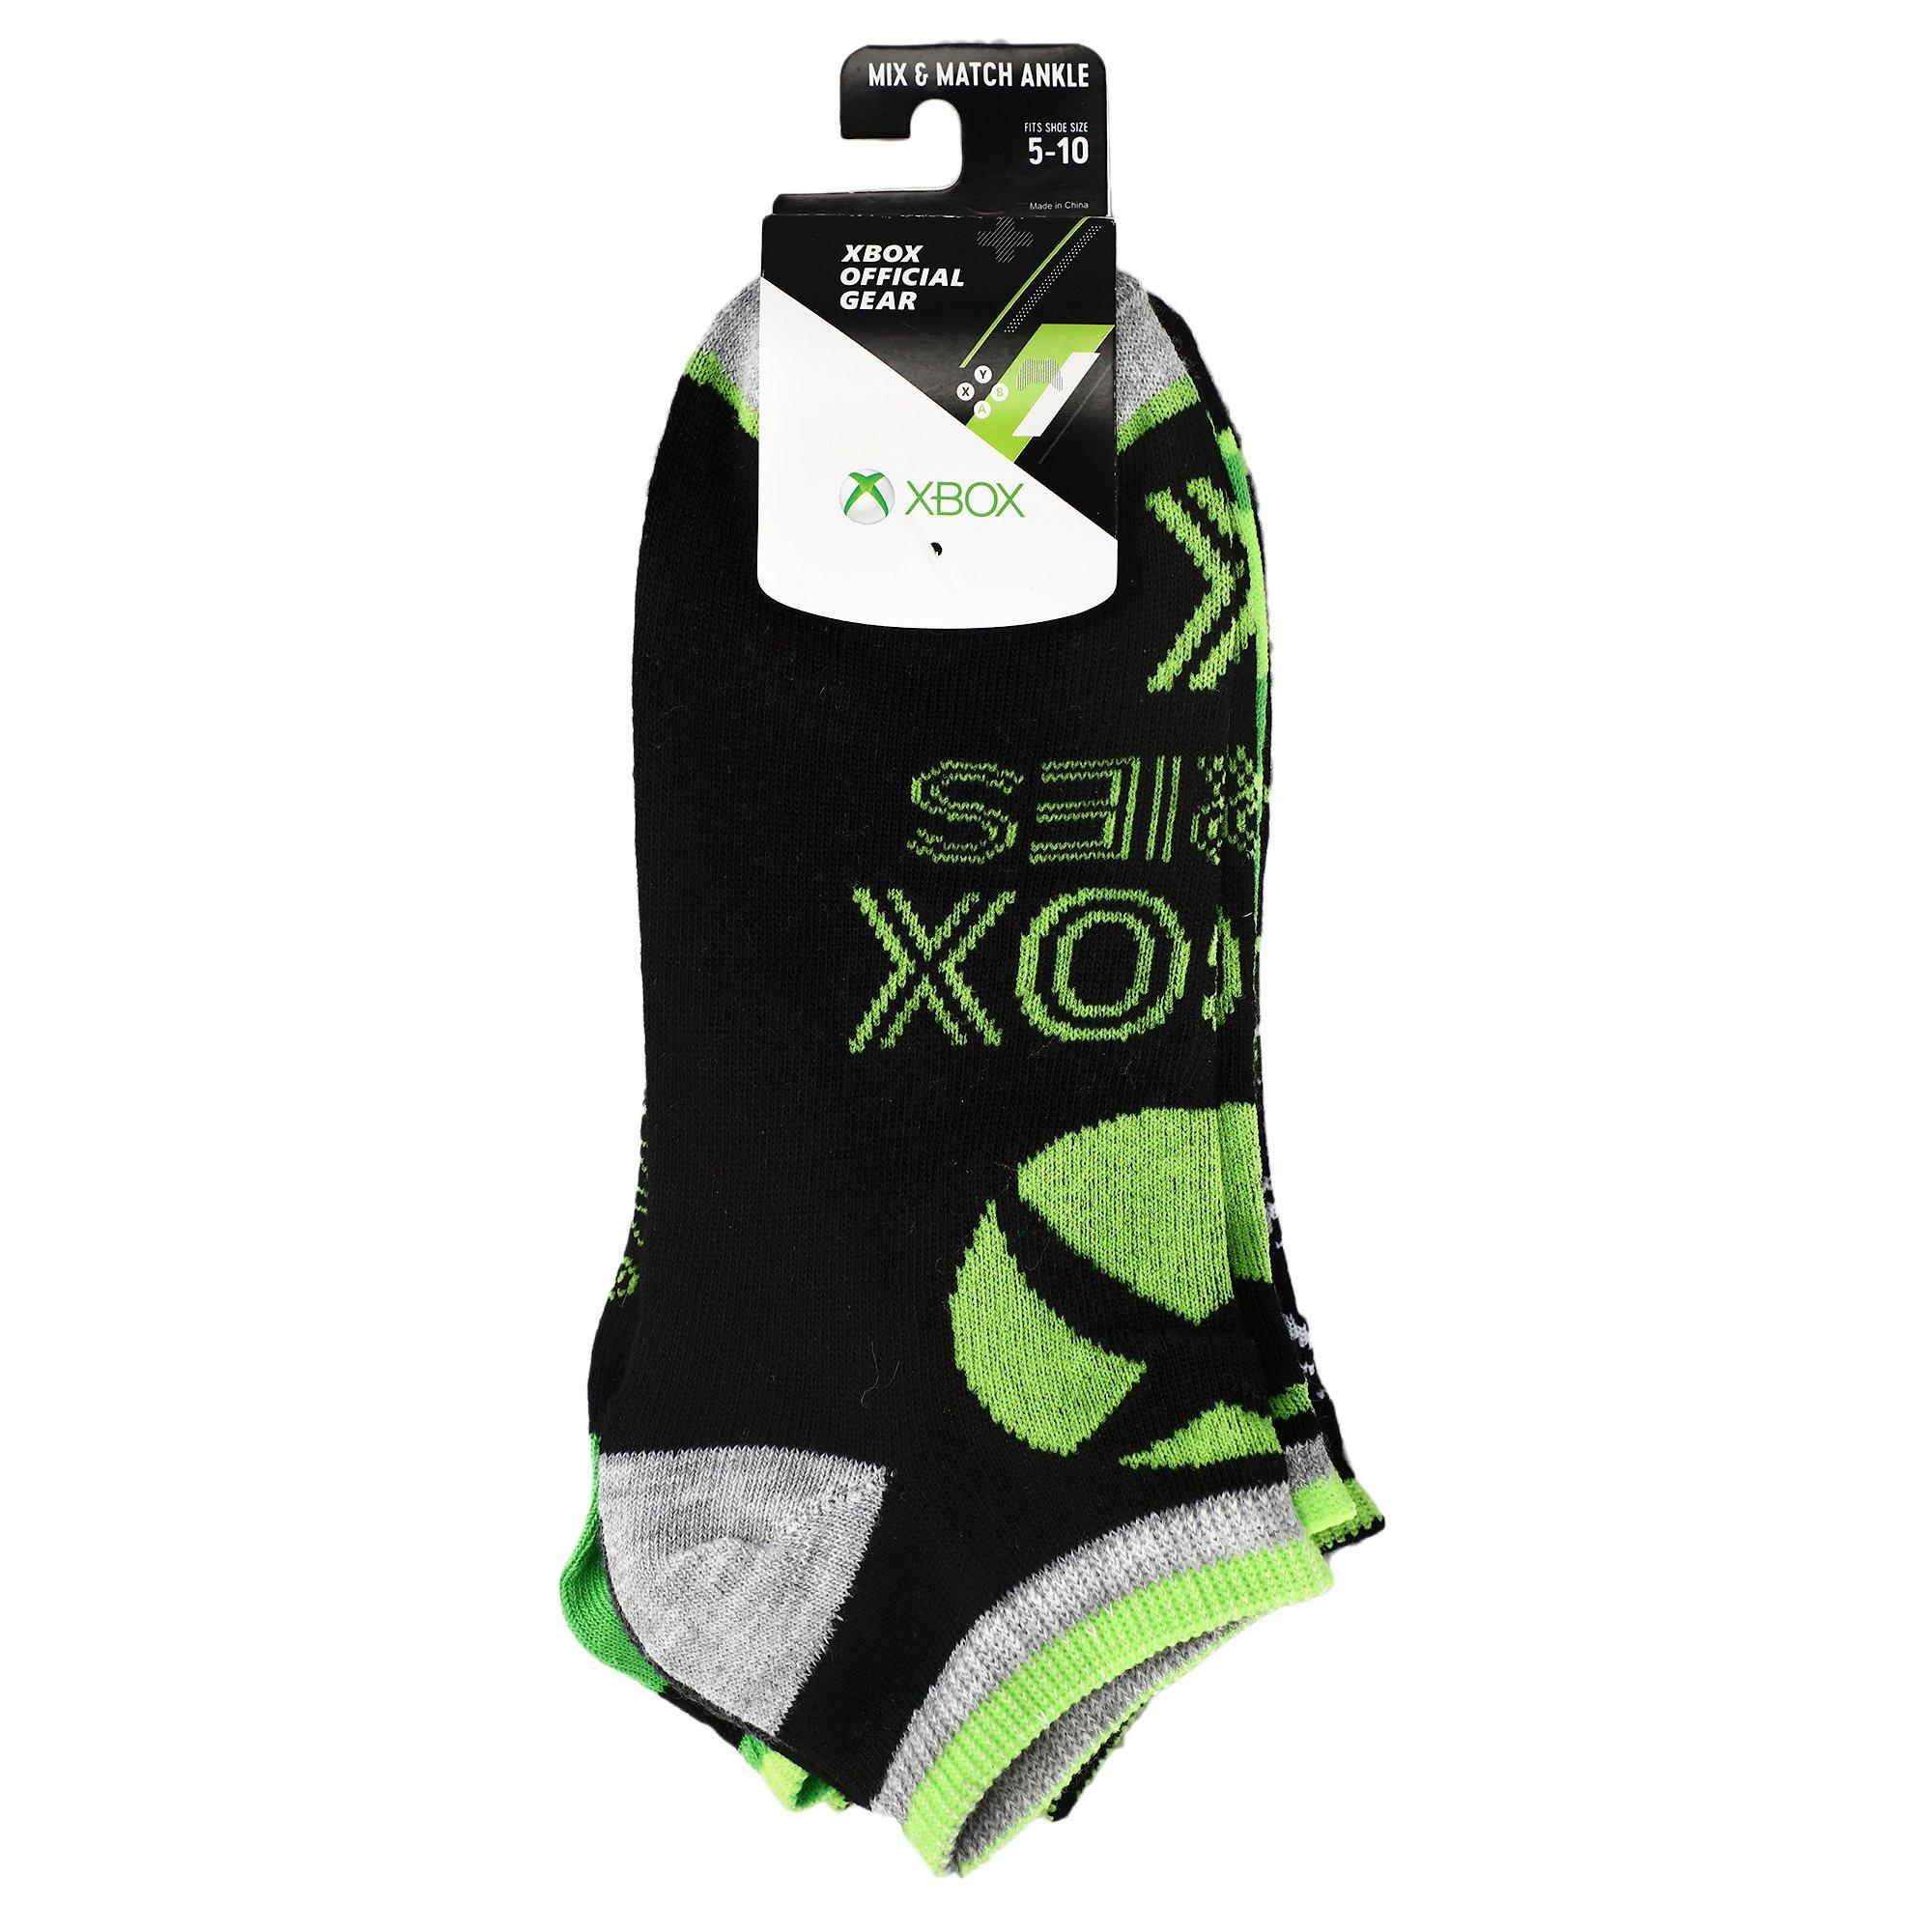 list item 7 of 7 Xbox Series X Mix and Match Ankle Socks 5 Pack